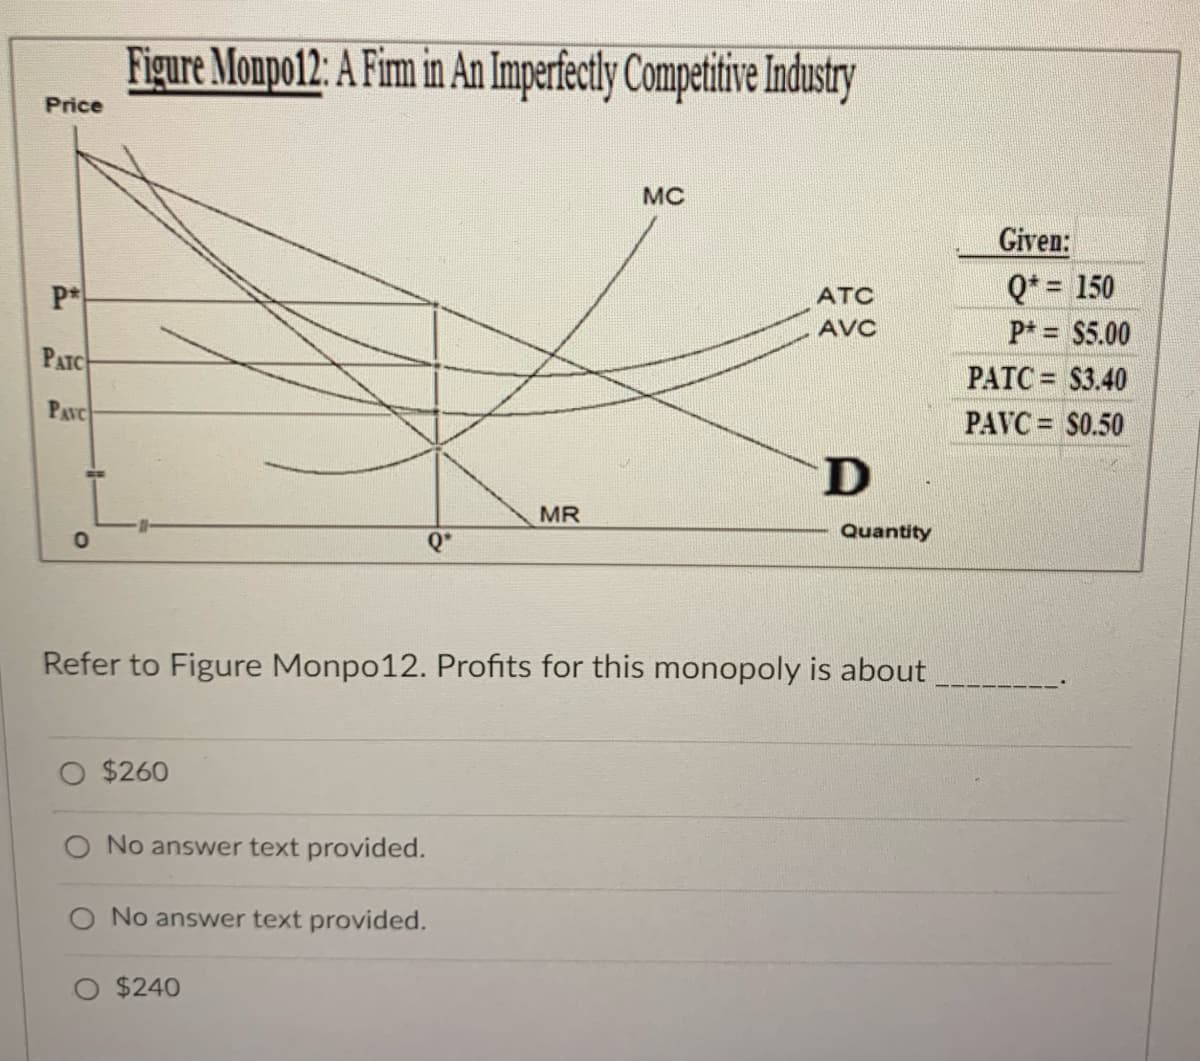 Figure Monpo12: A Fim in An Imperfectly Competitive Industry
Price
MC
Given:
Q* = 150
ATC
AVC
P* = $5.00
PATC
PATC = $3.40
%3D
PAVC
PAVC = S0.50
%3D
D
MR
Quantity
Q*
Refer to Figure Monpo12. Profits for this monopoly is about
$260
O No answer text provided.
O No answer text provided.
$240
